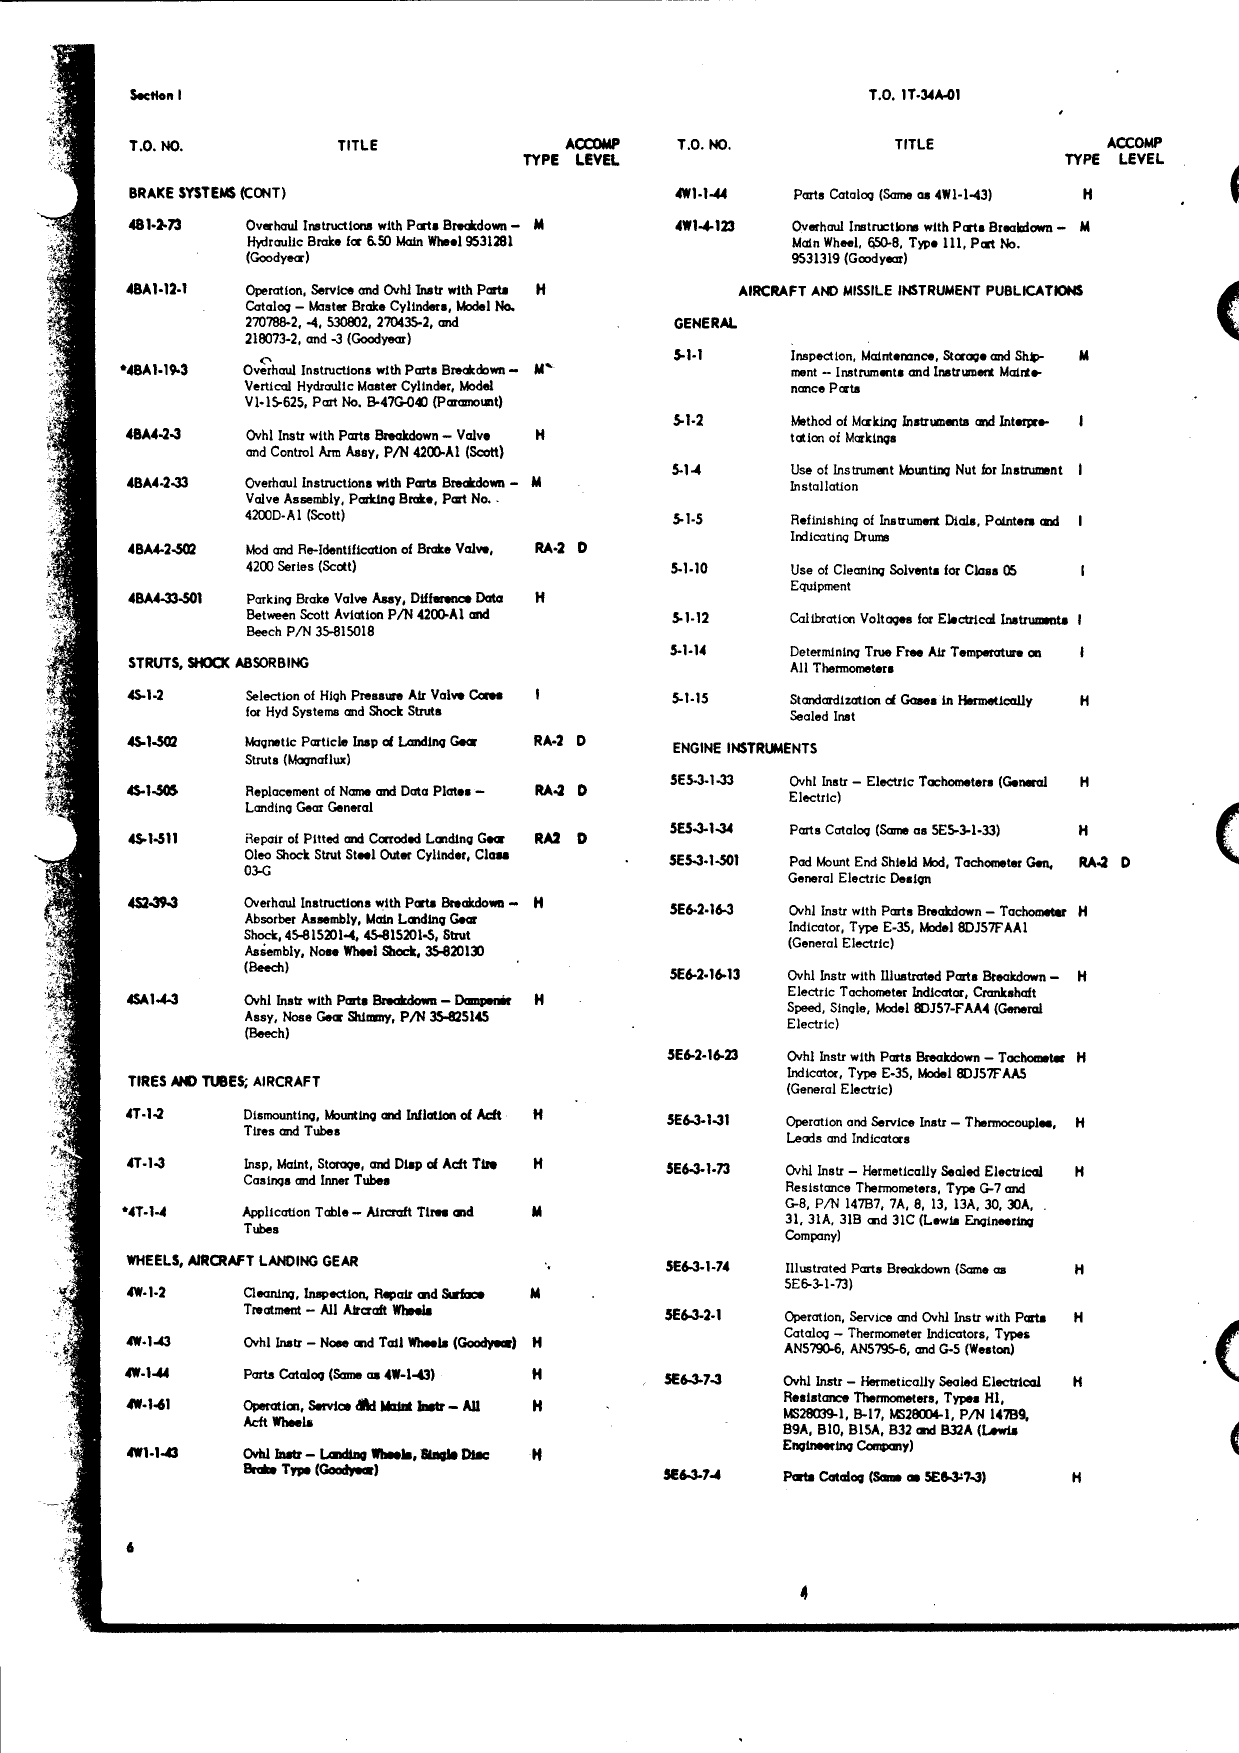 Sample page 6 from AirCorps Library document: List of Applicable Publications for T-34A Aircraft and Equipment